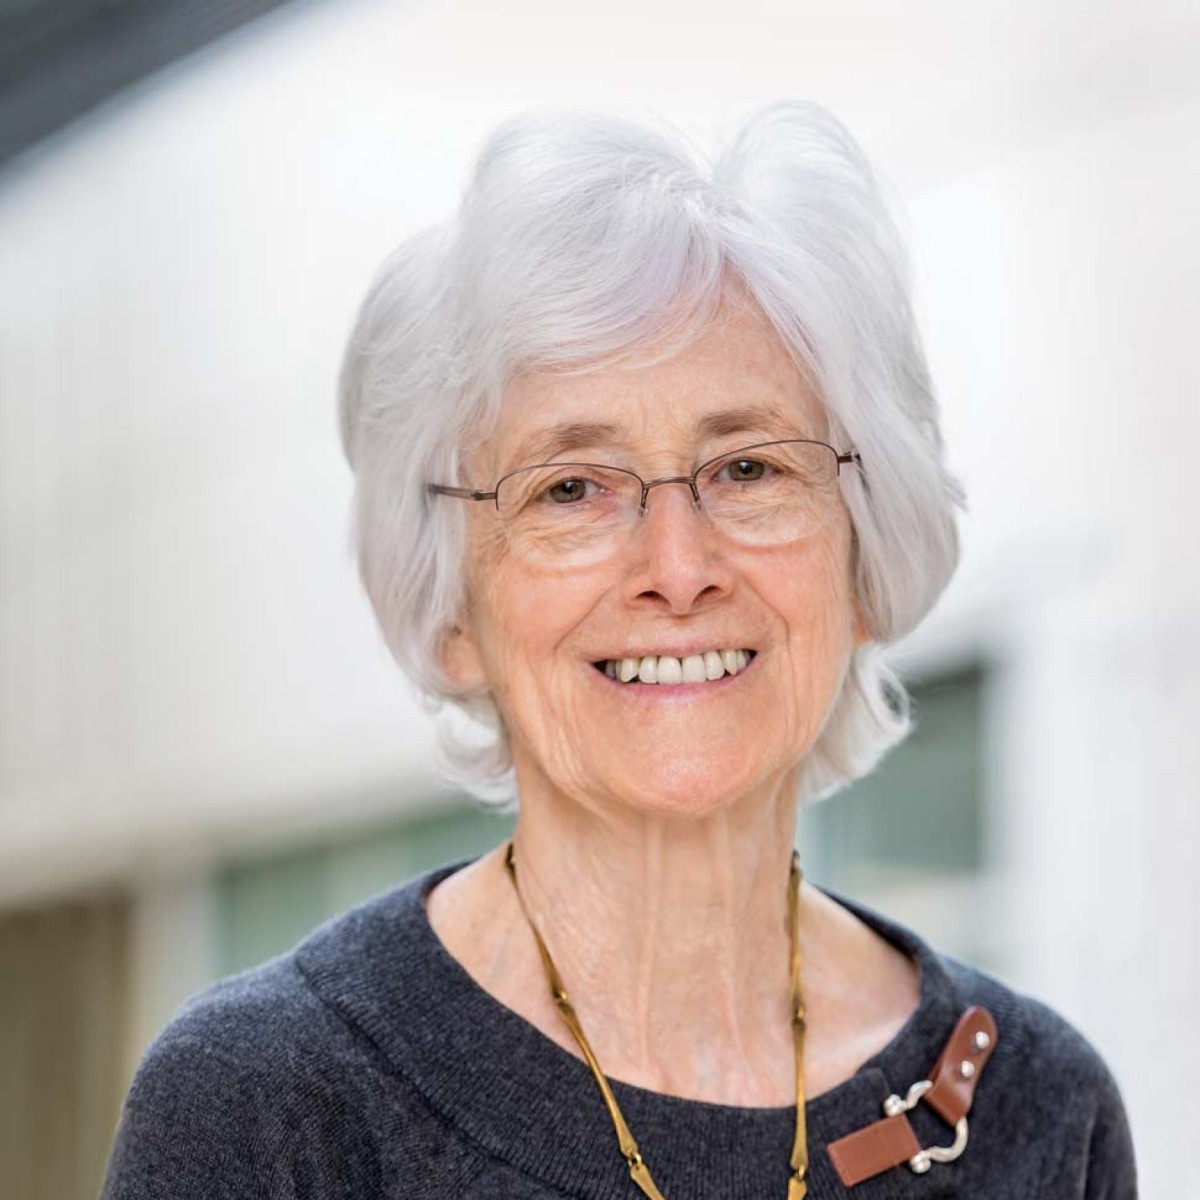 Across a legendary career, @BCLynchSchool Professor Emerita Maria Estela Brisk earned a reputation as a leading expert on language & education and an unapologetic warrior for bilingual learners' rights. She discusses what she's learned in BC Magazine ➡️ bc.edu/bc-web/sites/s…